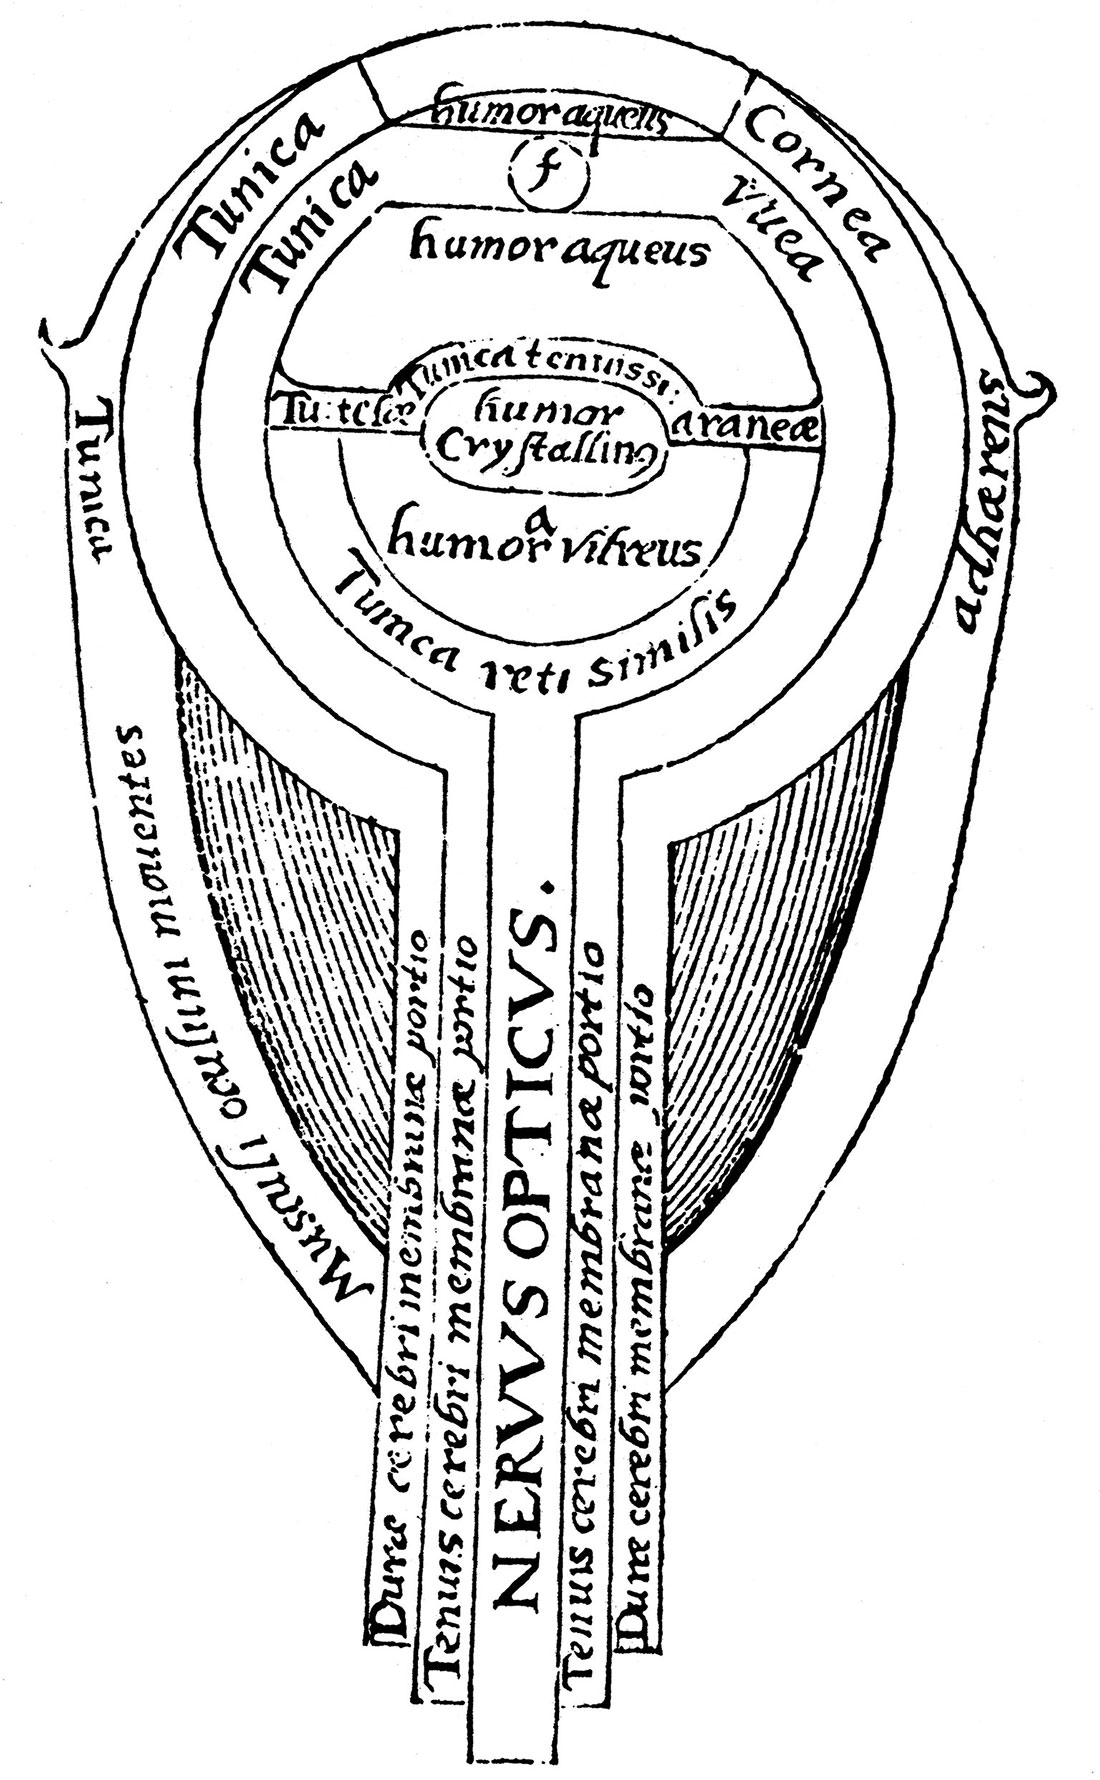 Here’s looking at you: the anatomy of an eye, from Opticae Thesaurus (1572), German, woodcut.